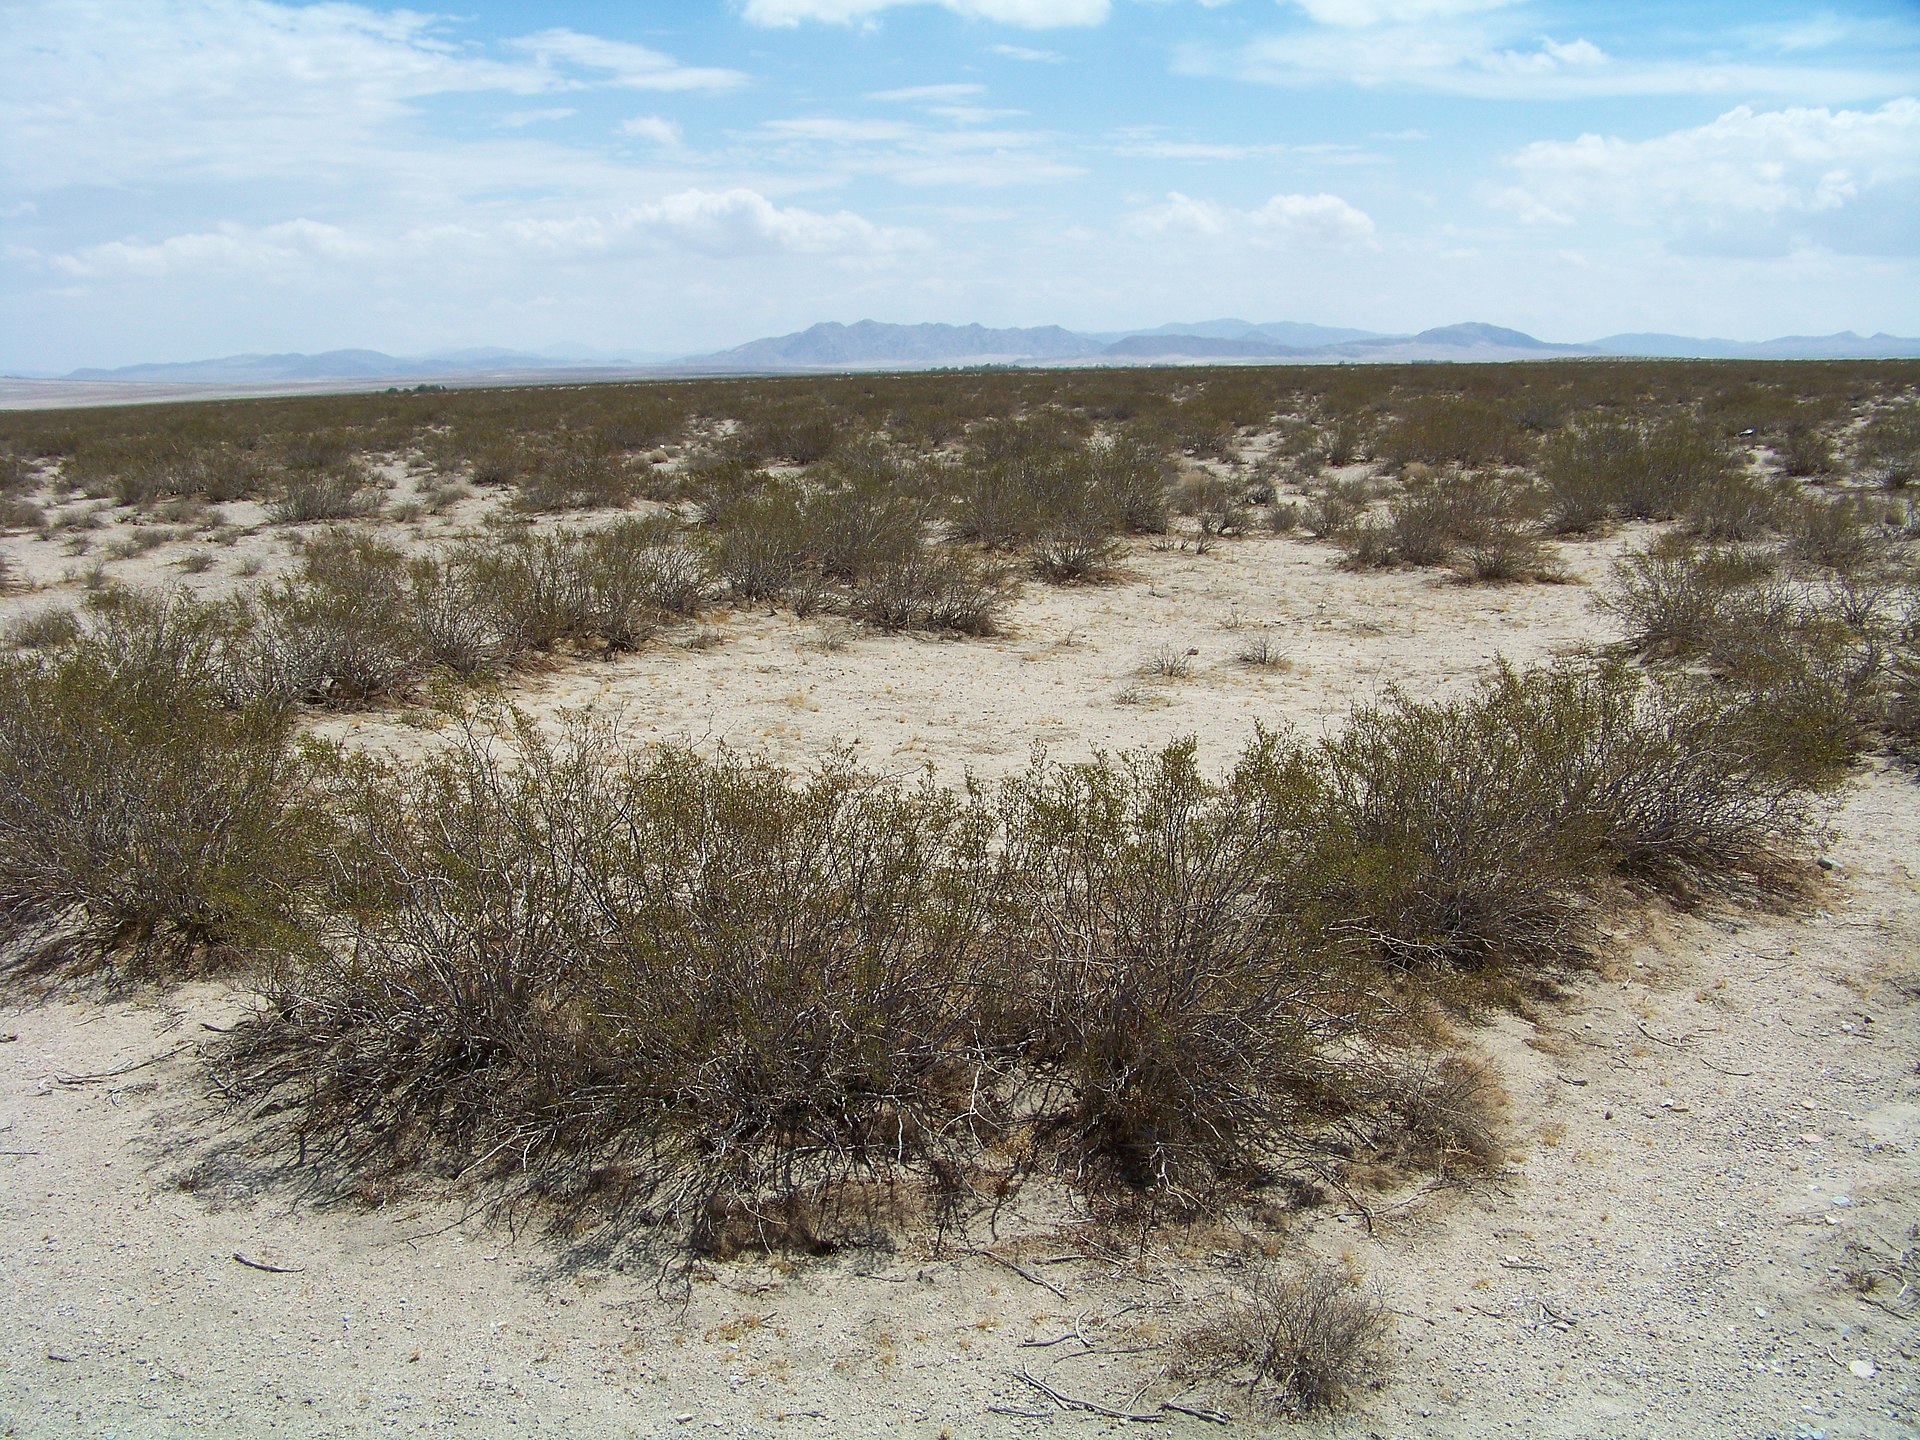 King Clone The Mojave Desert Is Home To A Plant That Has Lived For 11,700 Years